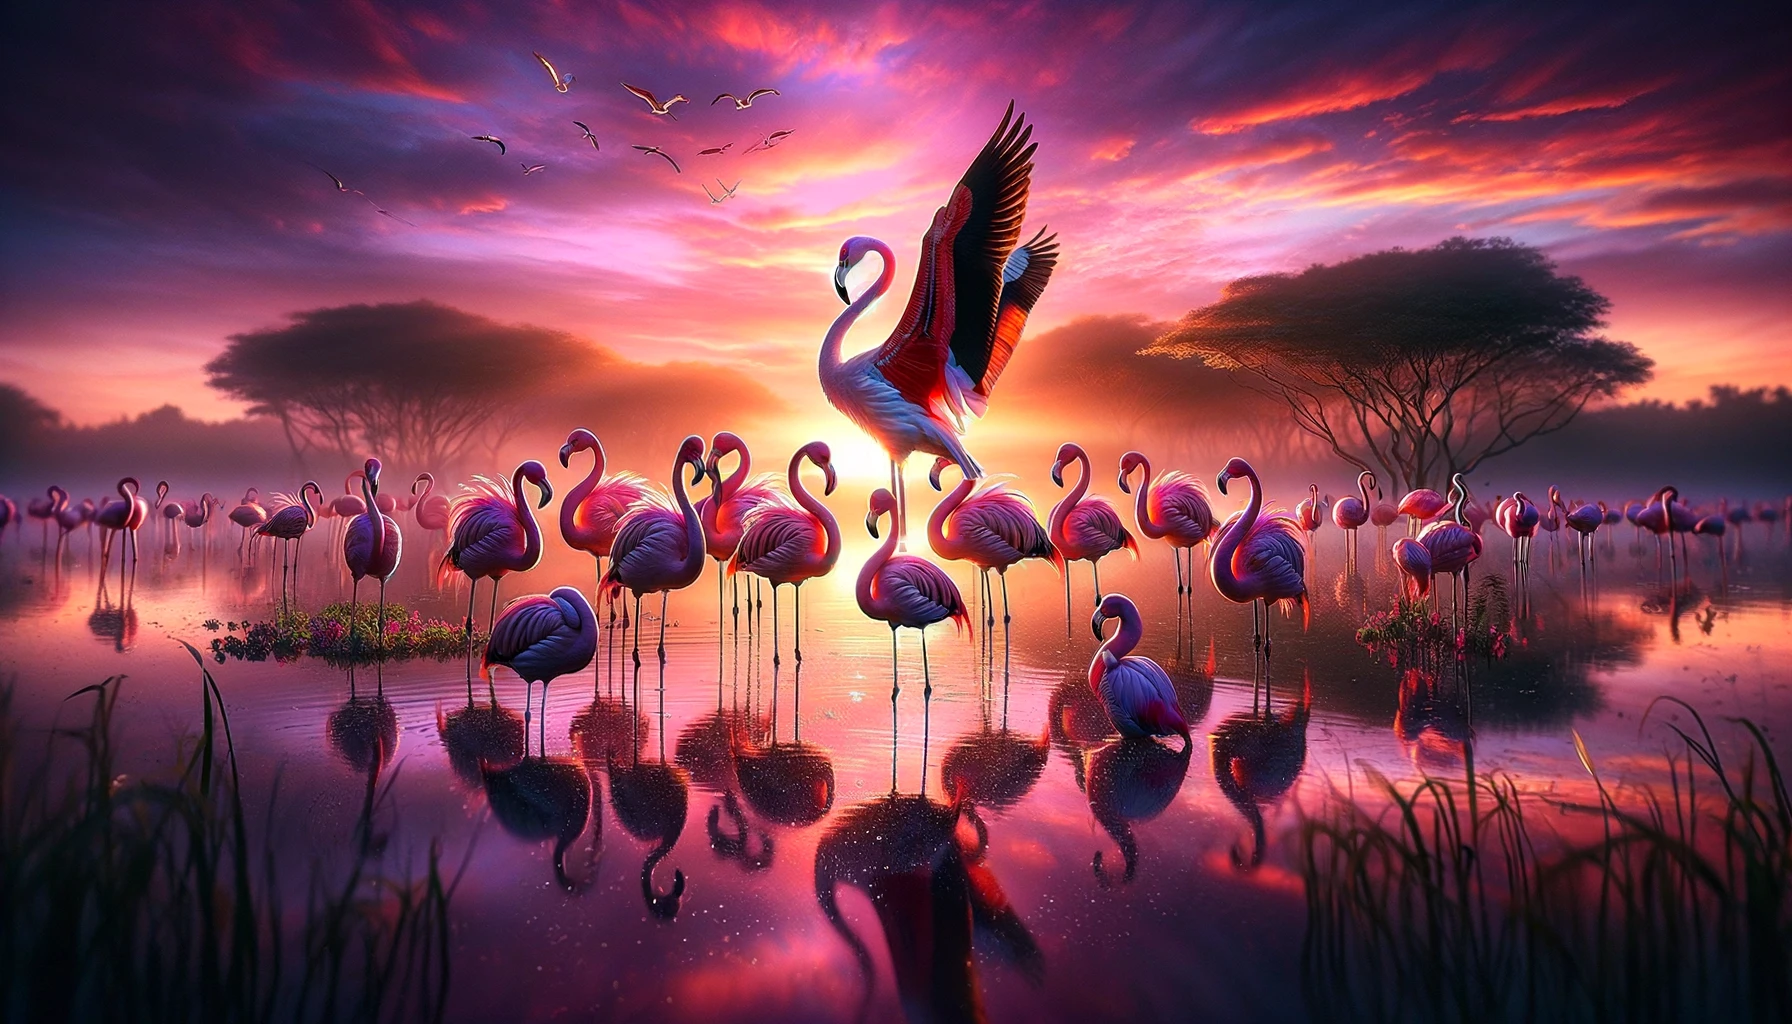 Spiritual Meaning of Flamingos: A Dance of Balance, Community and Vibrant Individuality